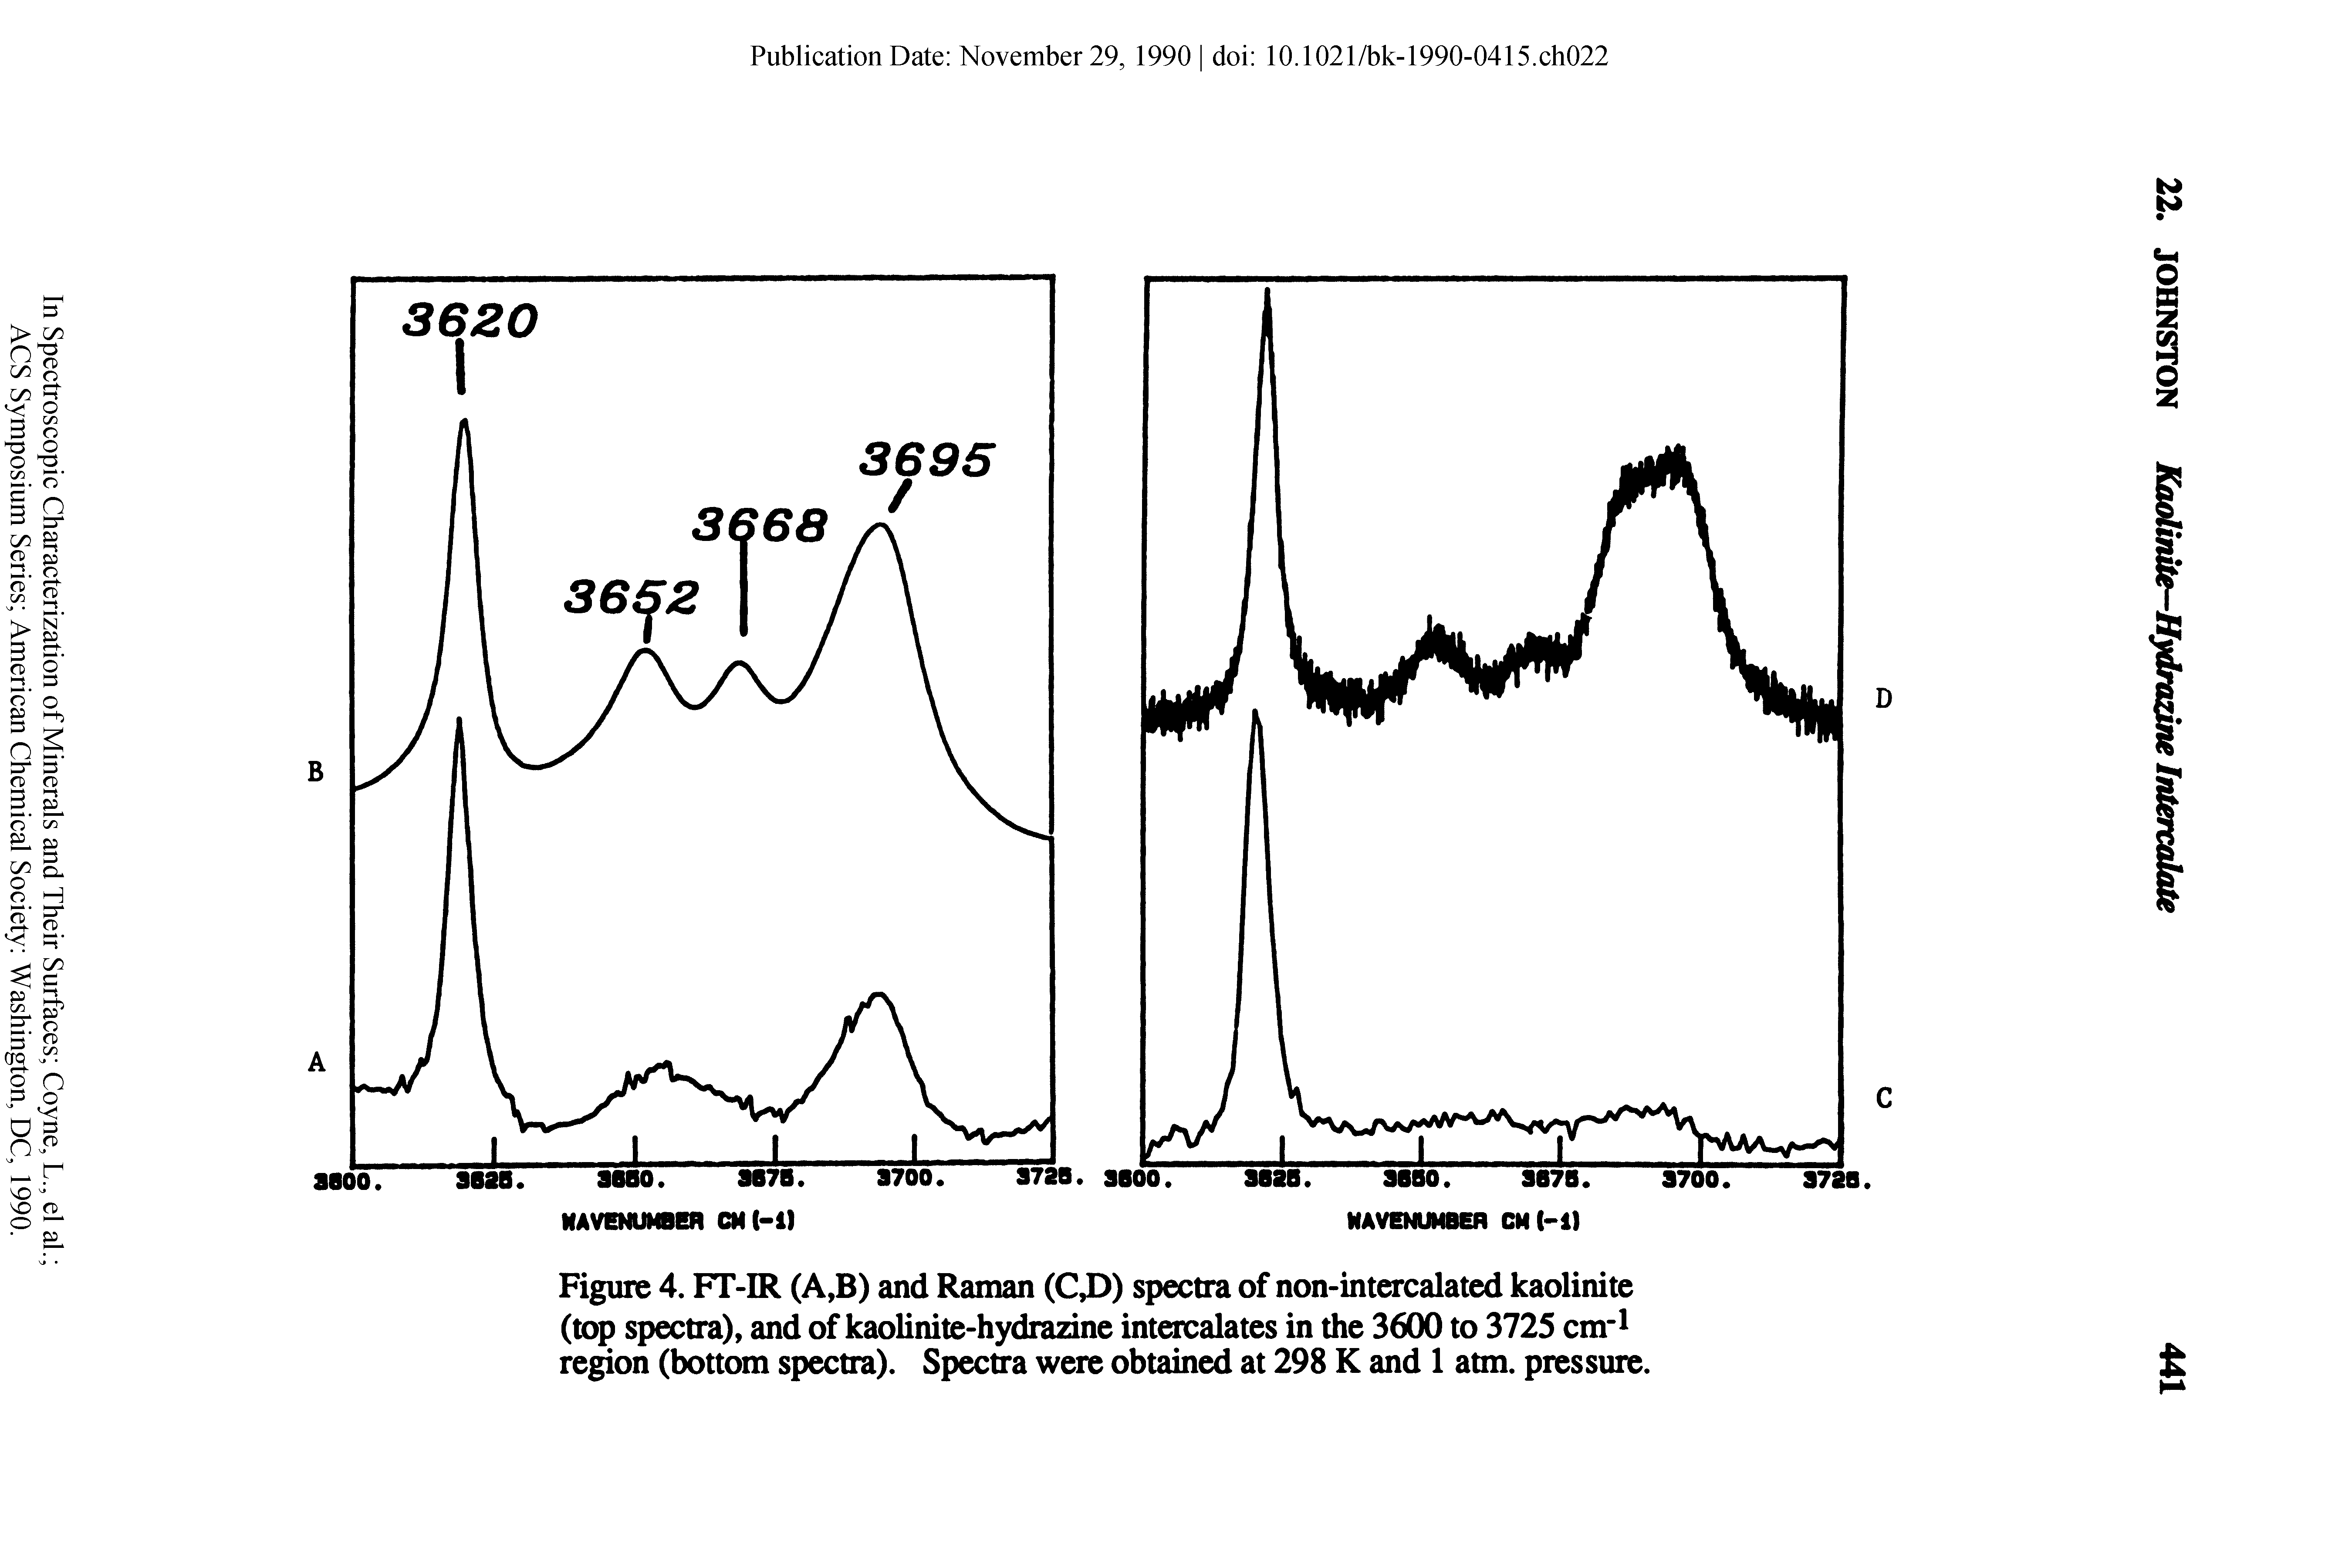 Figure 4. FT-IR (A,B) and Raman (C,D) spectra of non-intercalated kaolinite (top spectra), and of kaolinite-hydrazine intercalates in the 3600 to 3725 cm-1 region (bottom spectra). Spectra were obtained at 298 K and 1 atm. pressure.